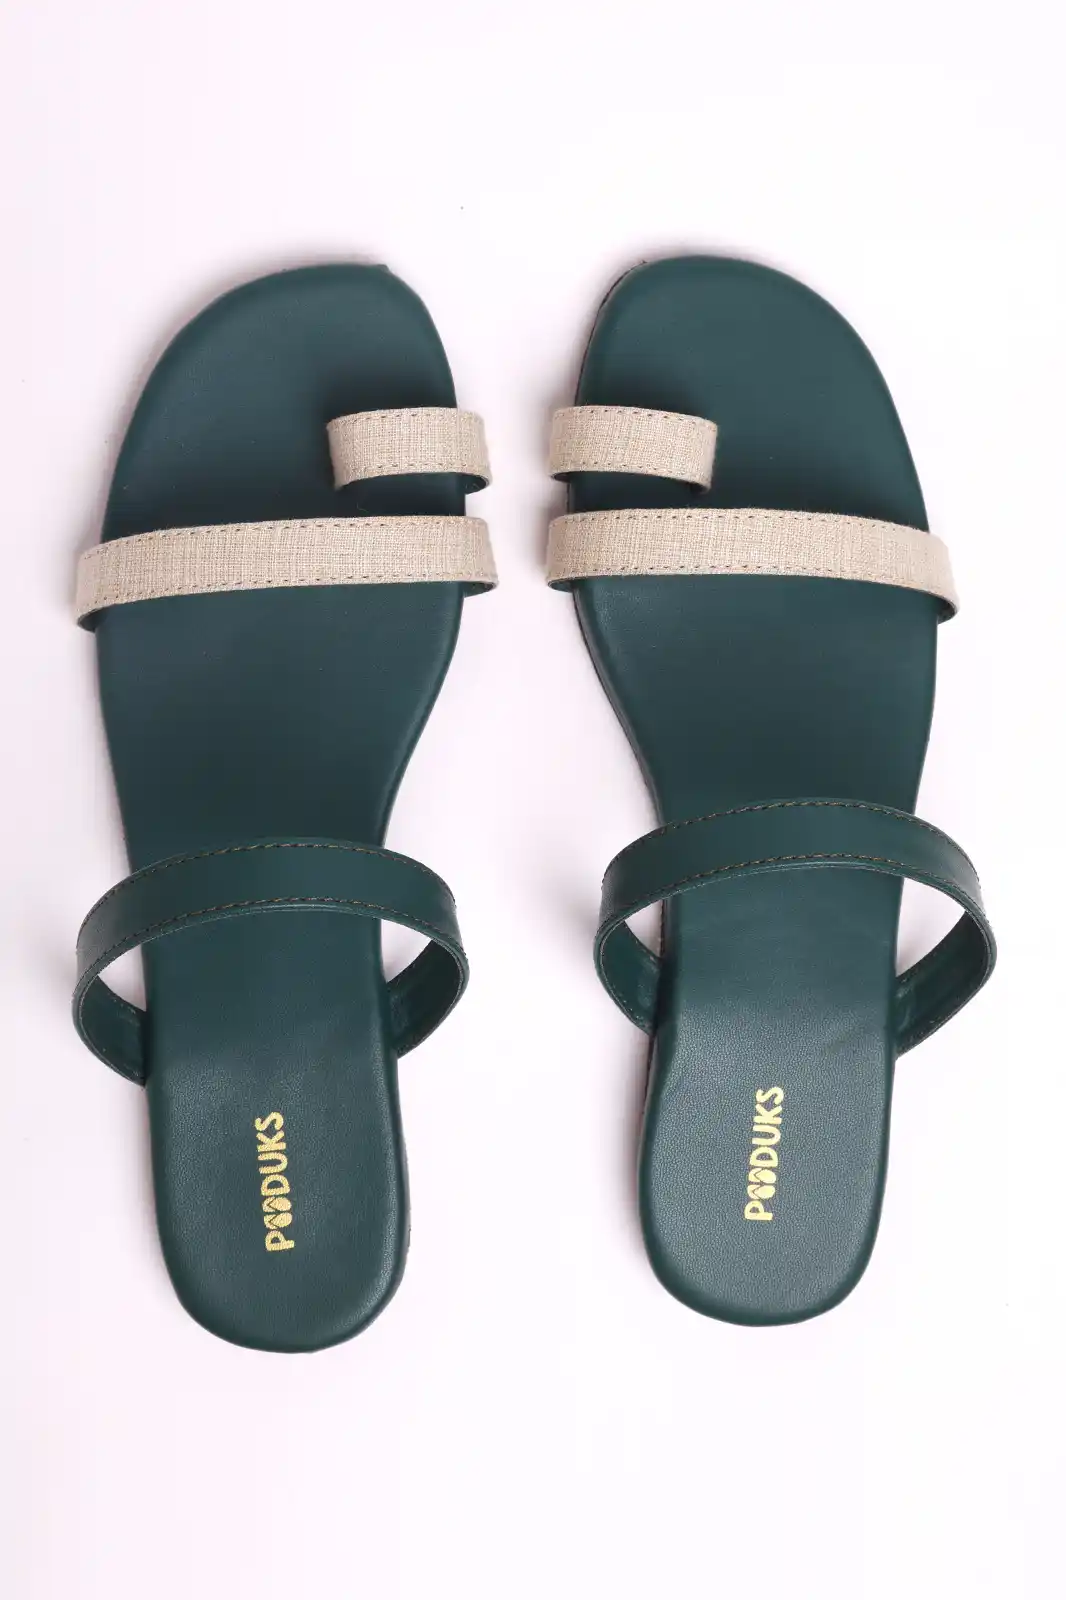 Paaduks Solid Green SUO One Toe Flats For Women, womens flats, women's flats, womens flats sandals, women flats shoes, womens flats comfortable, organic footwear, vegan footwear india, without heel sandals, vegan shoes in india, vegan shoes india, best brand for women's sandals in india, ladies sandals without heel, womens sandals and flip flops, women sandals leather, ladies sandals leather, two strap sandals, flip flops and slippers, women's sandals with soft soles, womens paaduks, womens footwear, womens sandals, women's shoes, women's sandals, women's formal shoes, womens sandals heels, women's heel sandals, women's shoe brands, womens sandals crocs, women's shoes online, women's footwear flats, womens footwear online, women's footwear brands, womens sandals online, sandals women's shoes, gold women's shoes, best women's footwear, women's sandals for wedding, women's footwear amazon, women's footwear heels